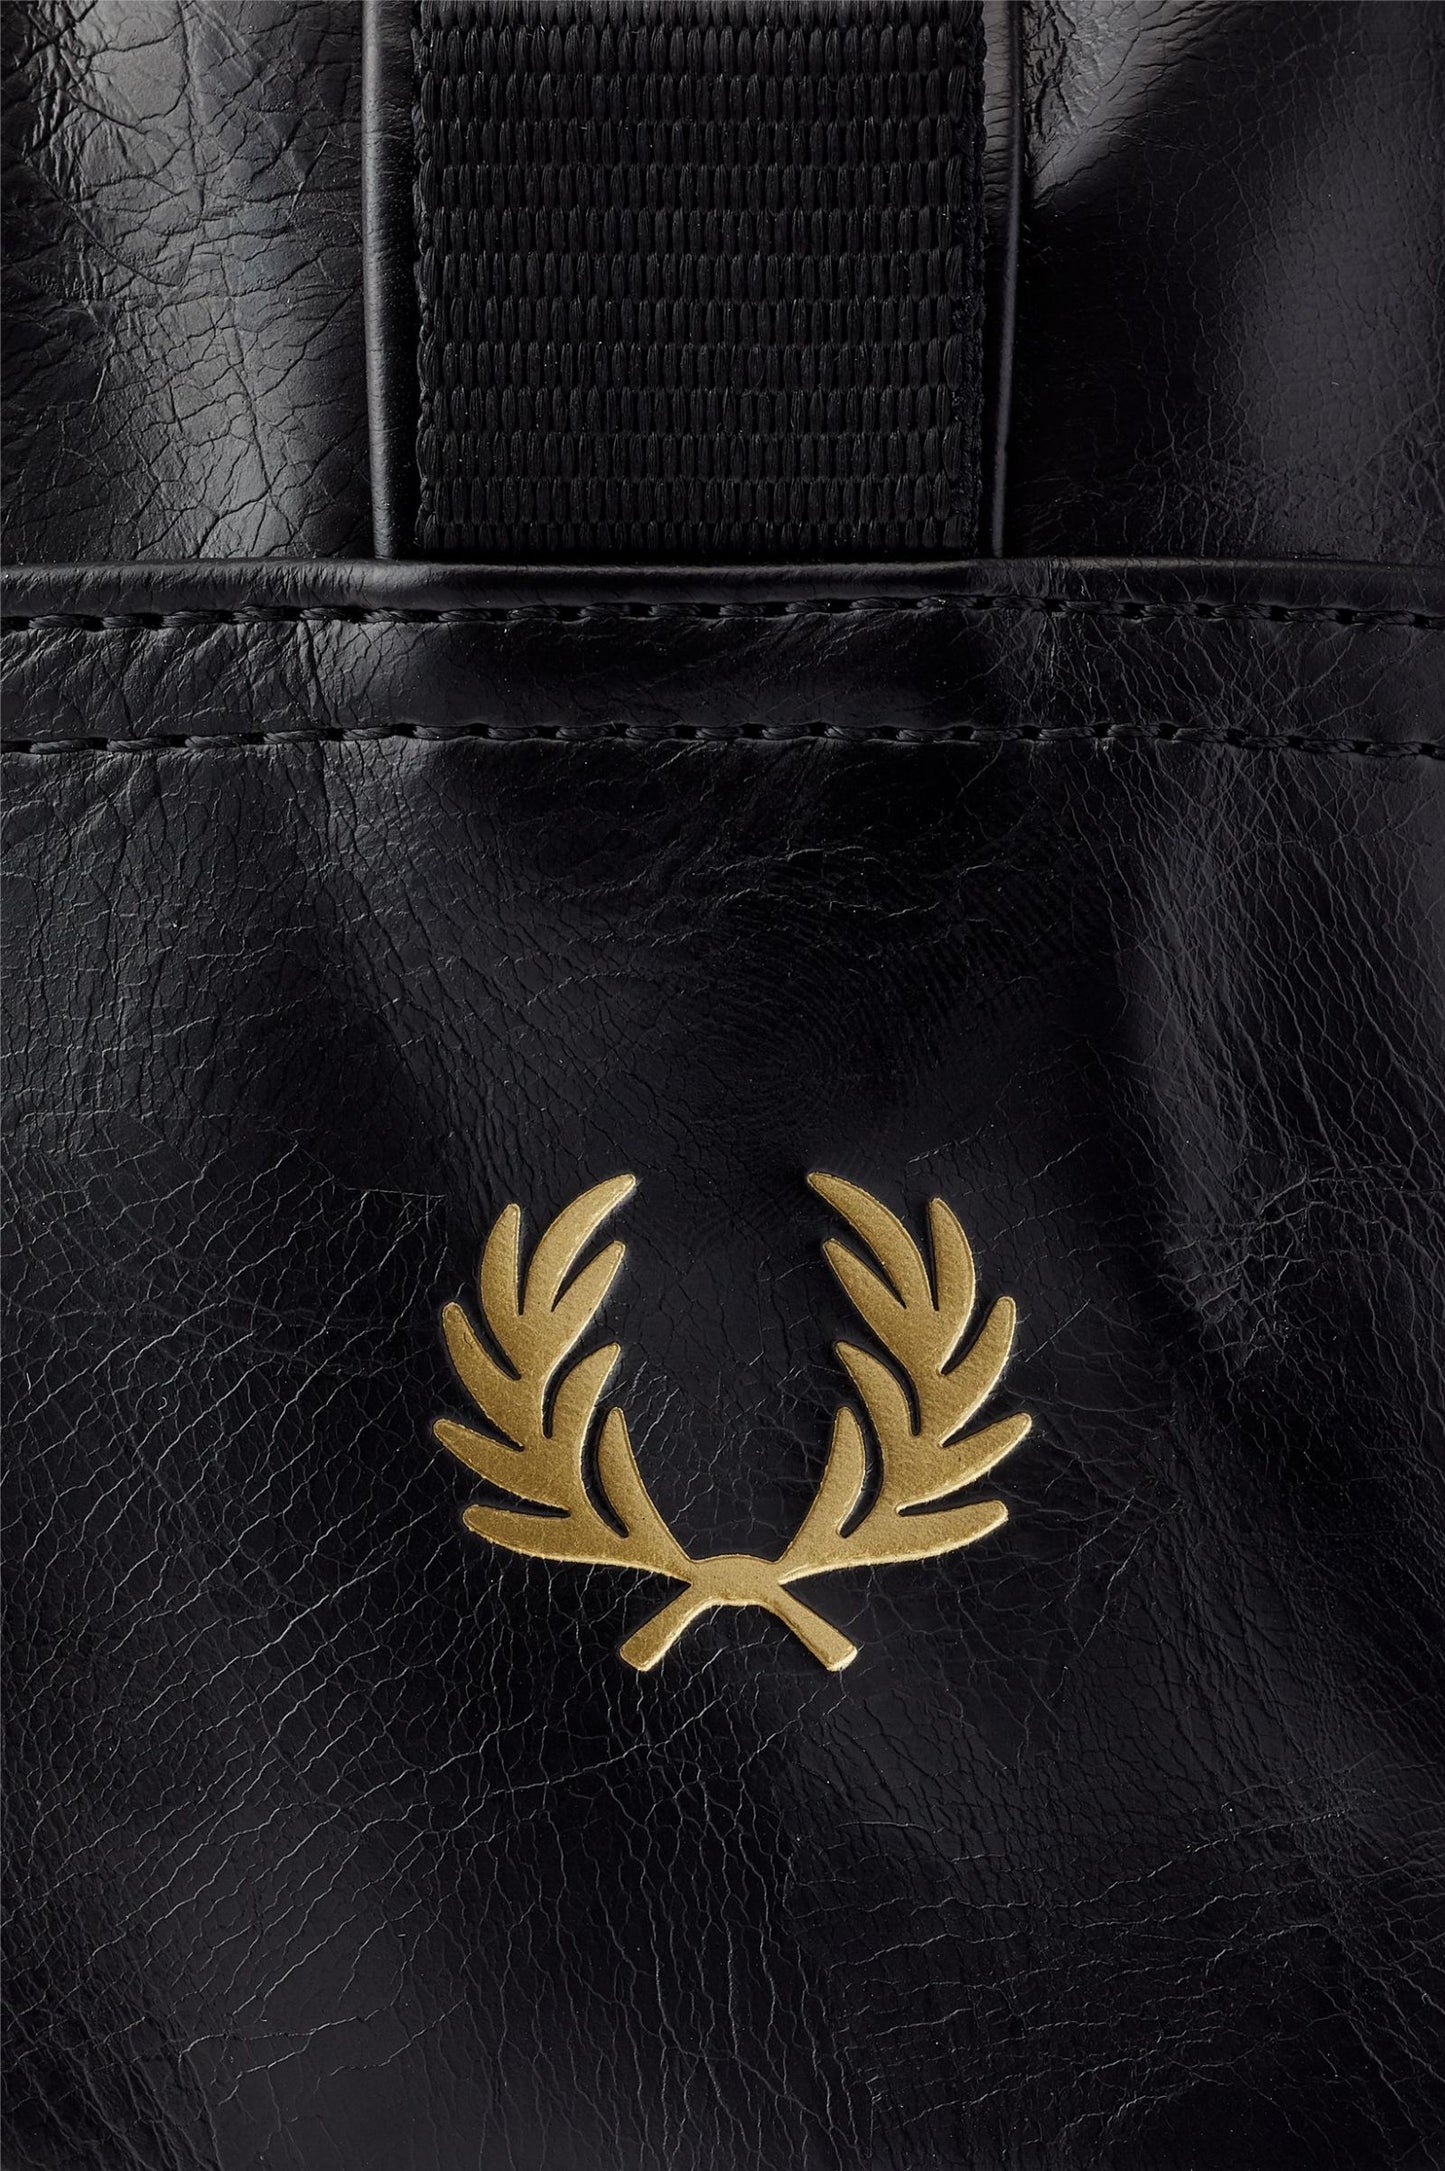 FRED PERRY ARCH BRANDED PU WASH BAG